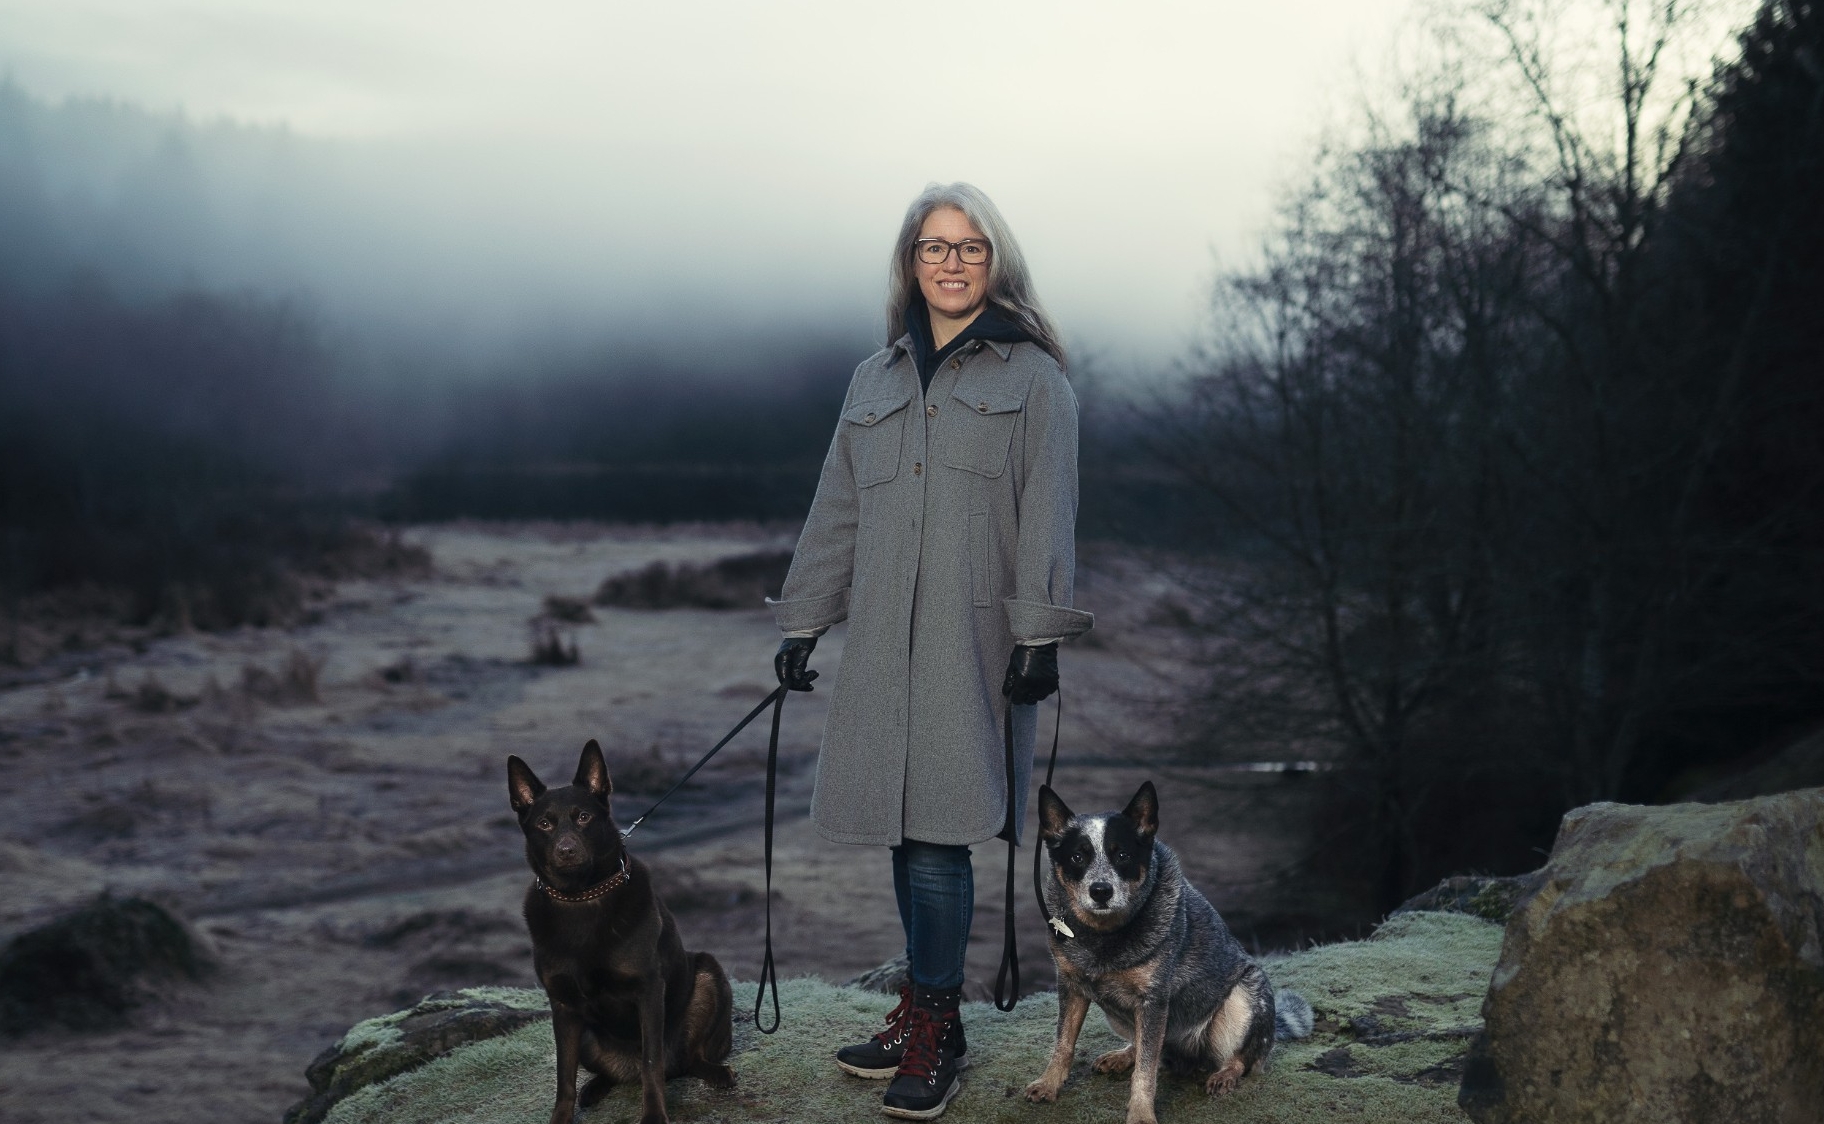 MPub alumna and author Susan Juby's pictured with her two dogs on a small barren hill.